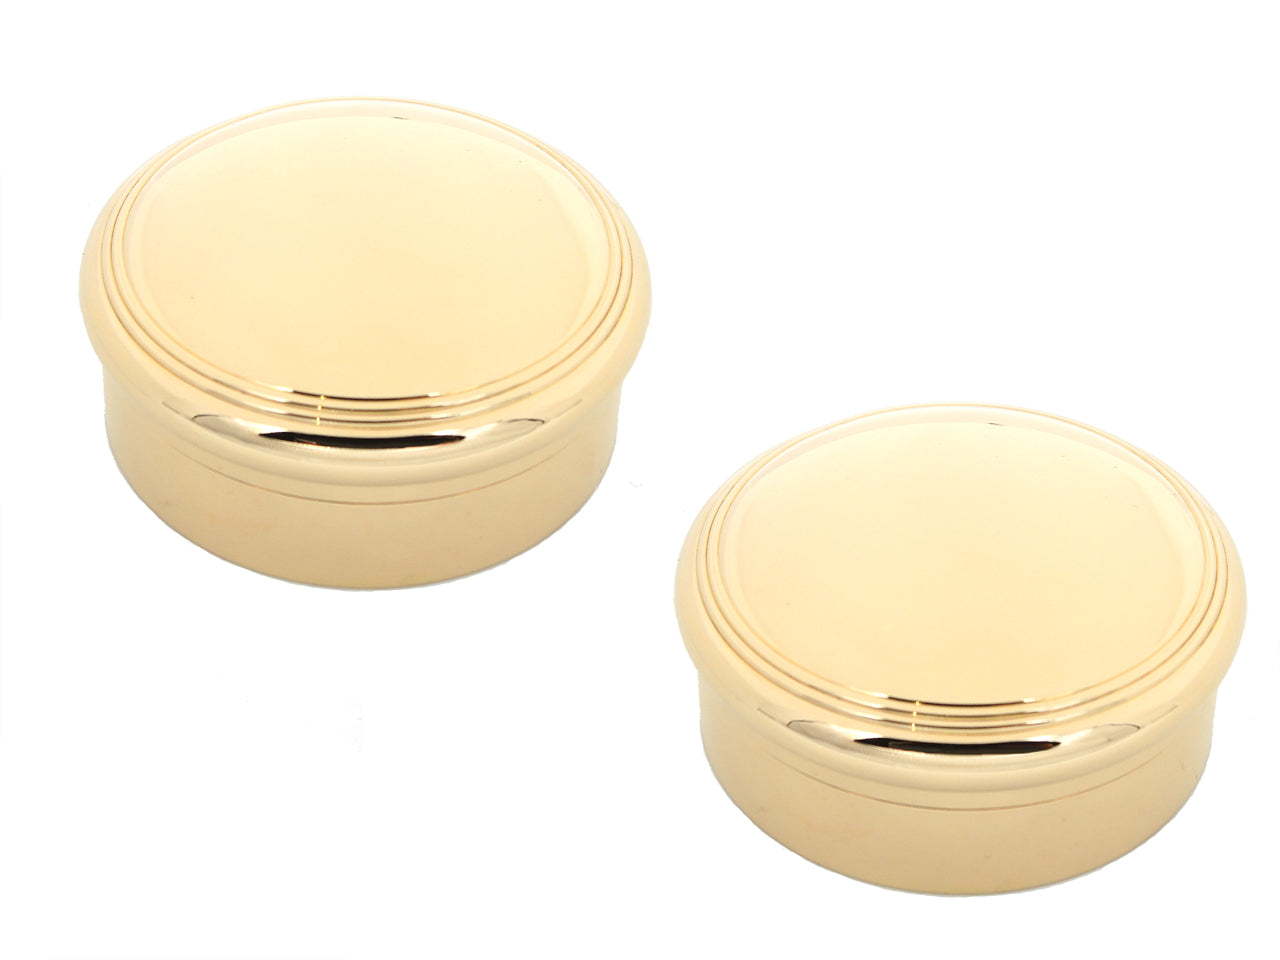 Pair of Tiffany & Co. Art Deco Pill Boxes in 18K Gold